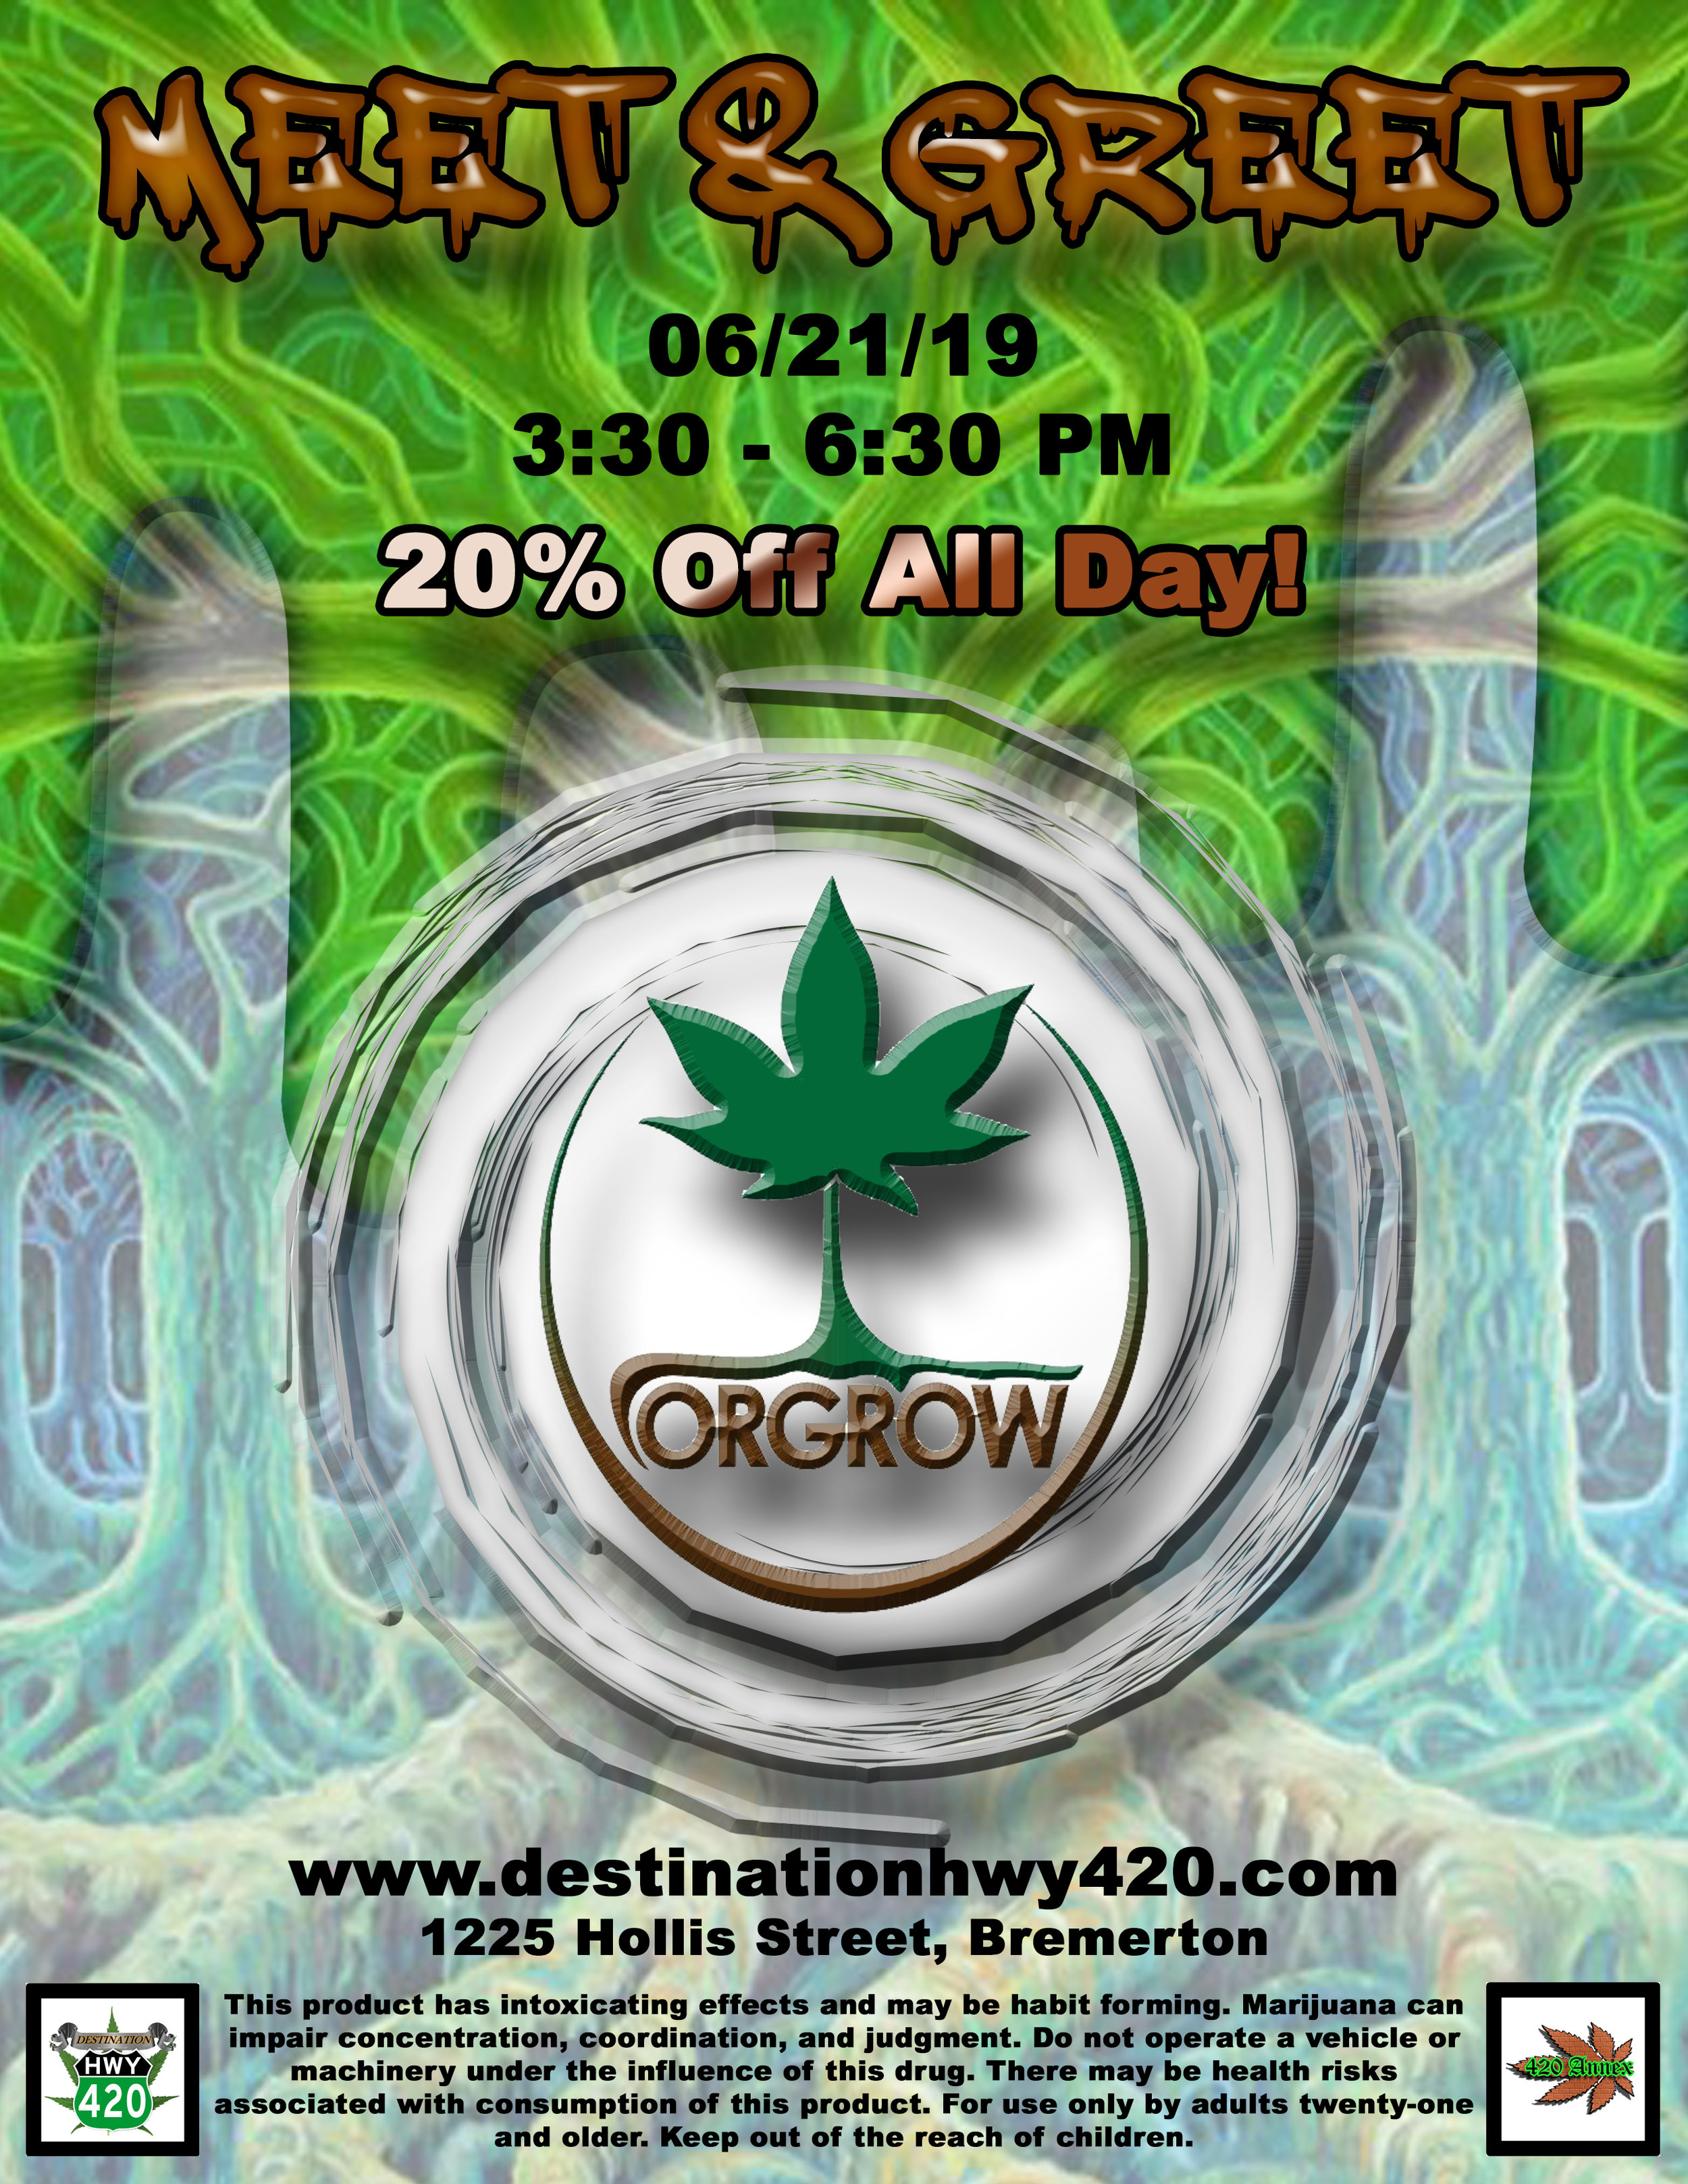 Orgrow is a Tier-3 marijuana producer/processor based out of Yakima Valley, WA. Orgrow produces marijuana flower, prerolled joints, infused joints, edibles, and concentrates. Orgrow products are available at Destination HWY 420 Bremerton!